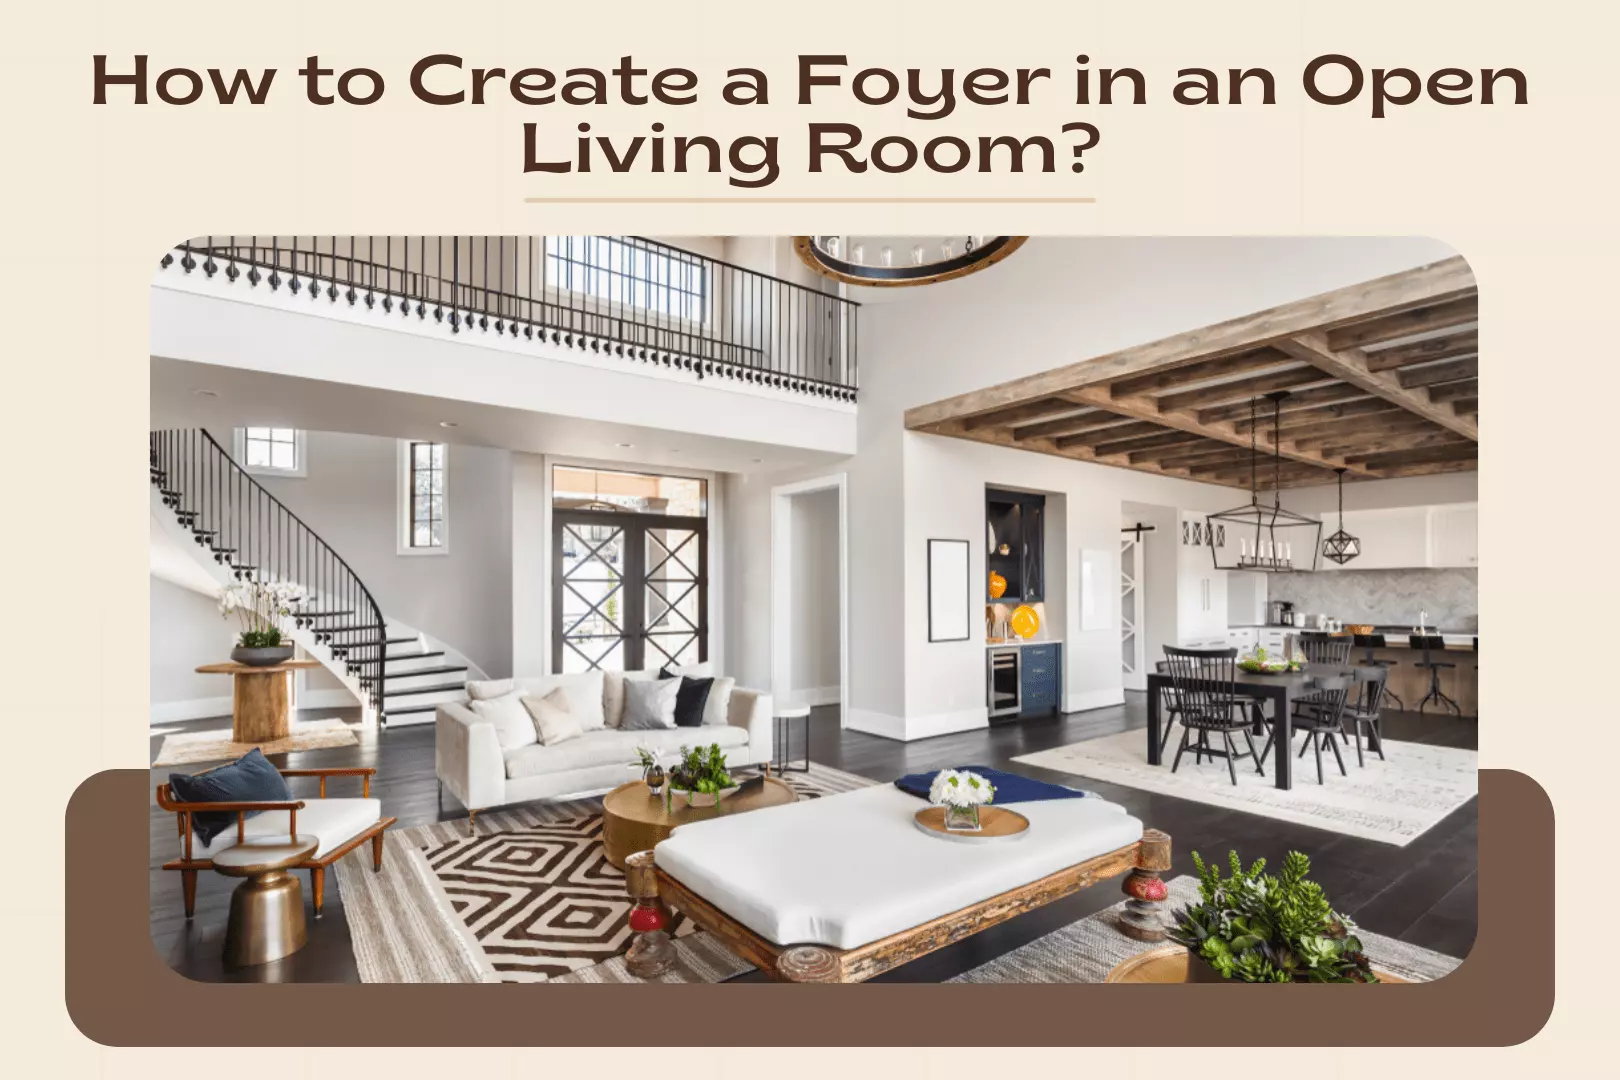 How To Create A Foyer In An Open Living Room: Essential Steps And Tips?